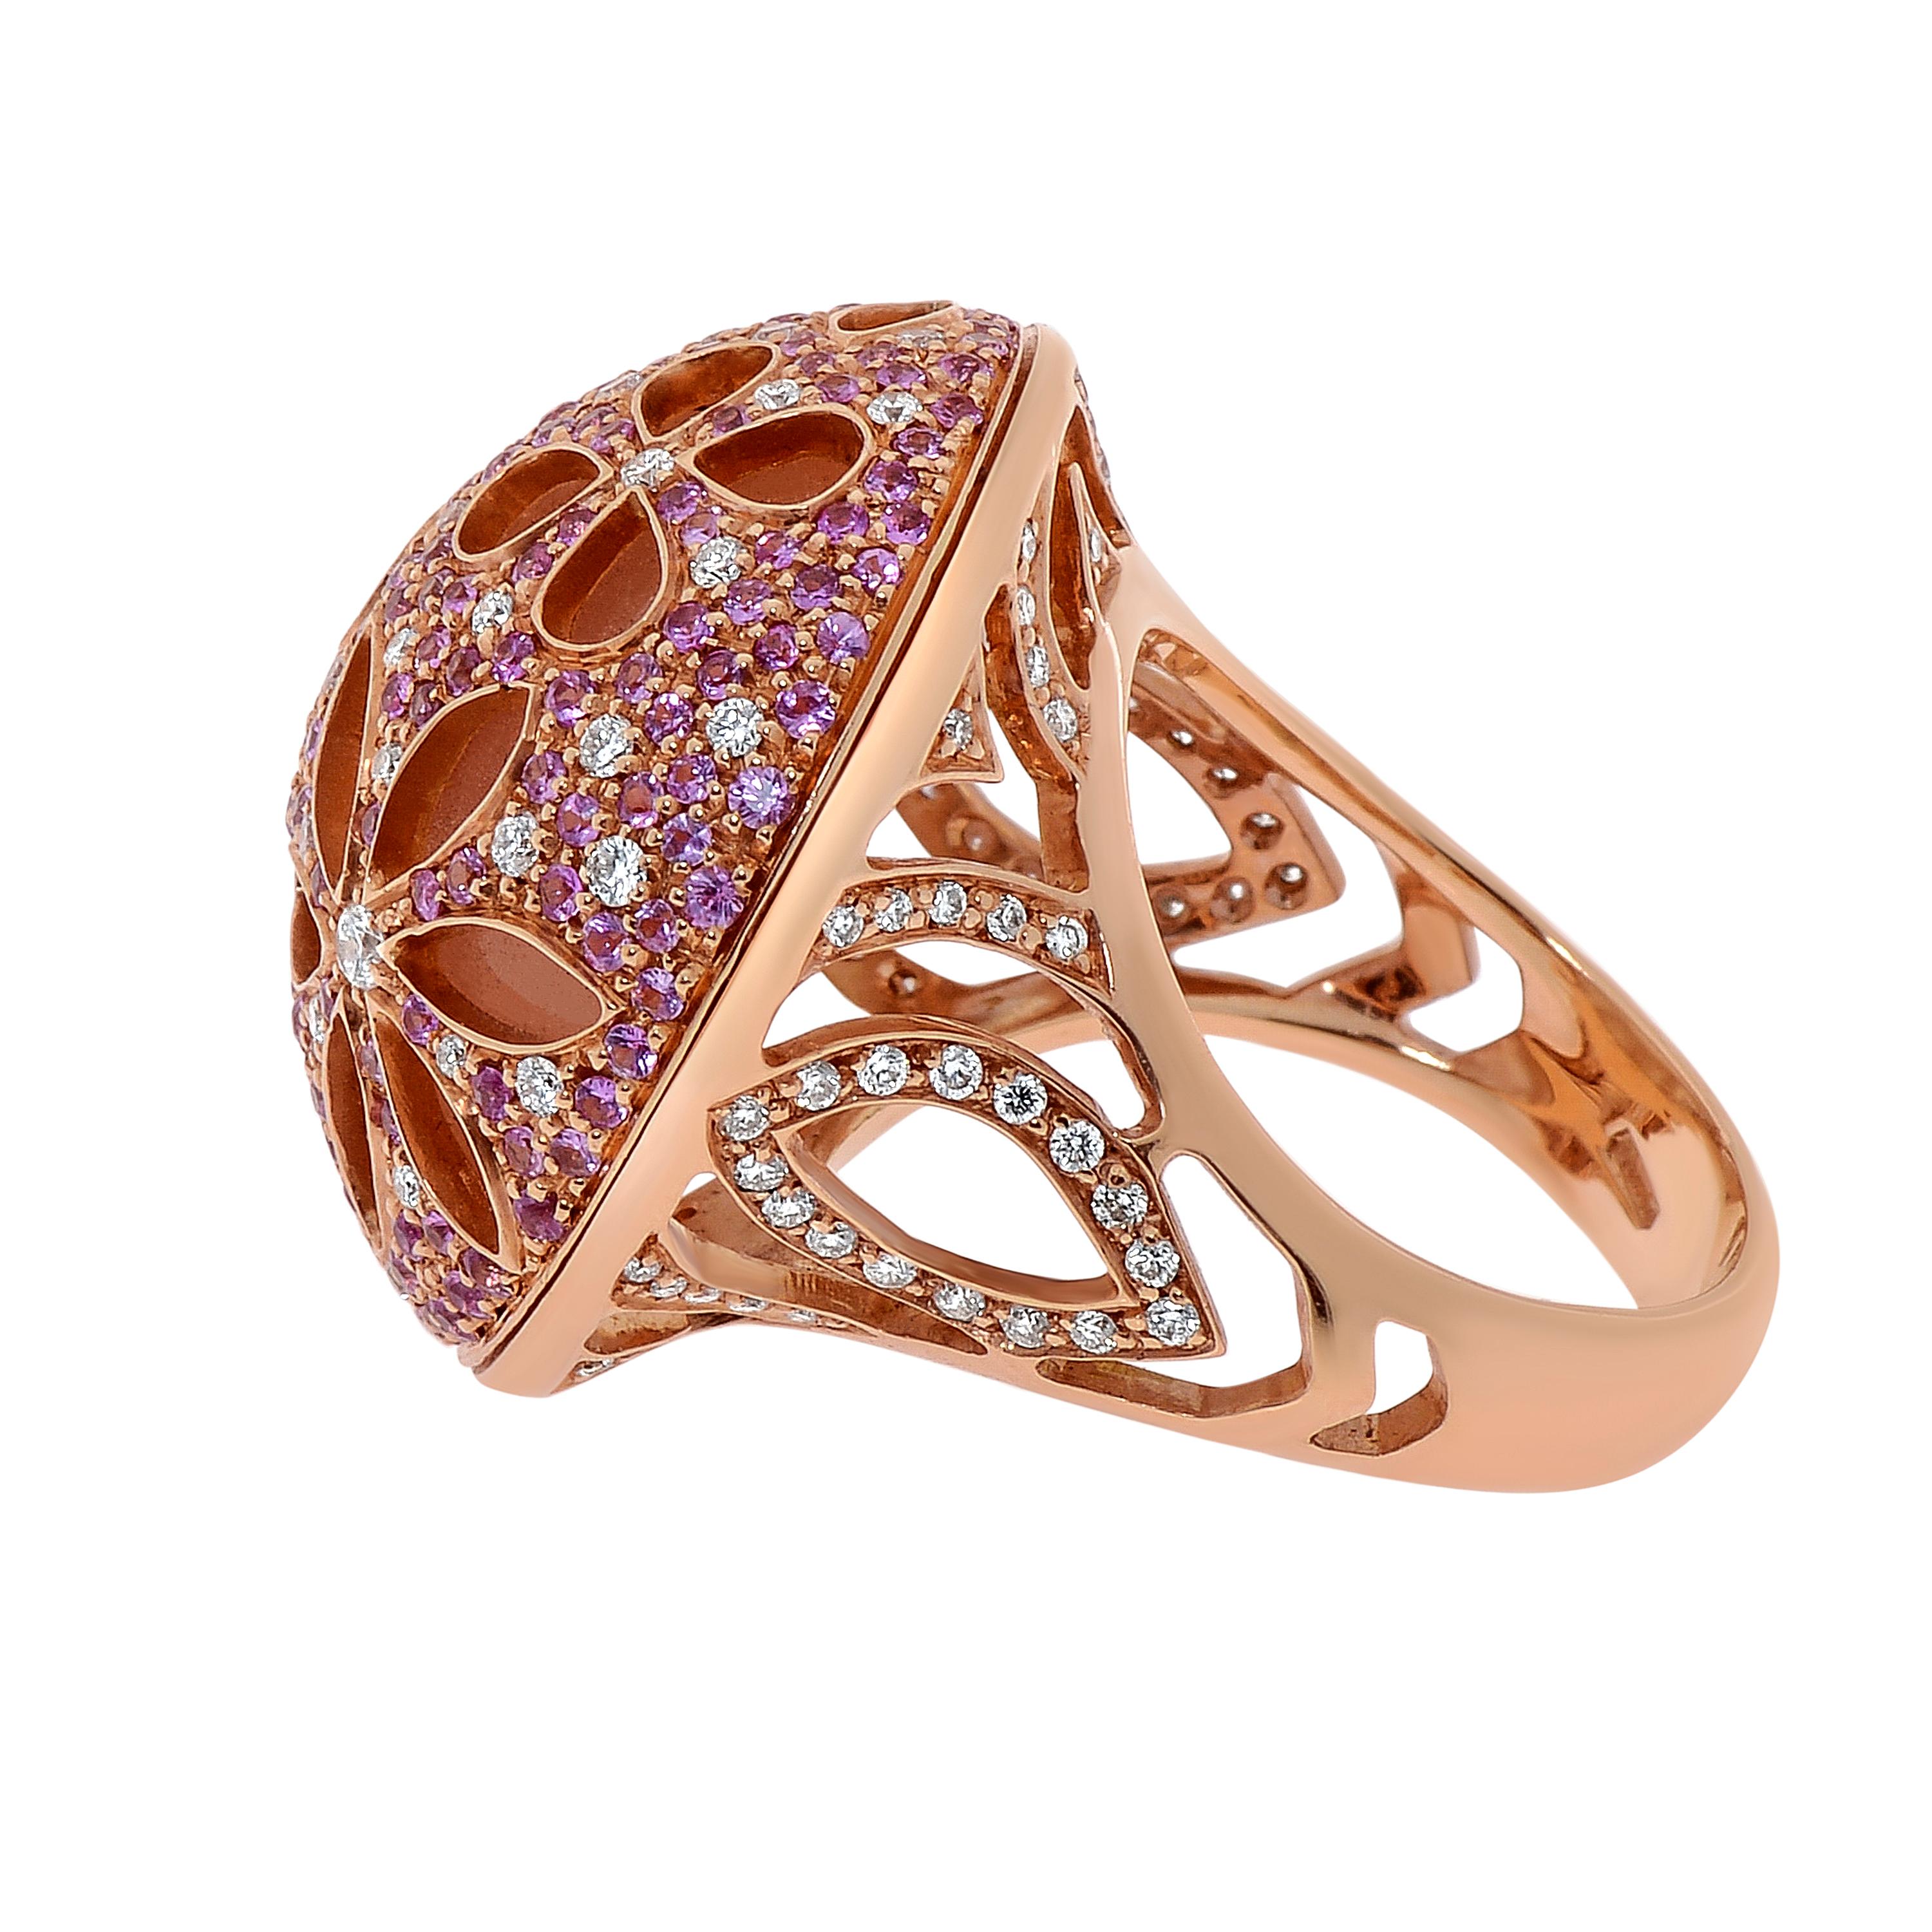 Contemporary Zydo 18K Rose Gold, Sapphire & Diamond Statement Ring sz. 6 For Sale